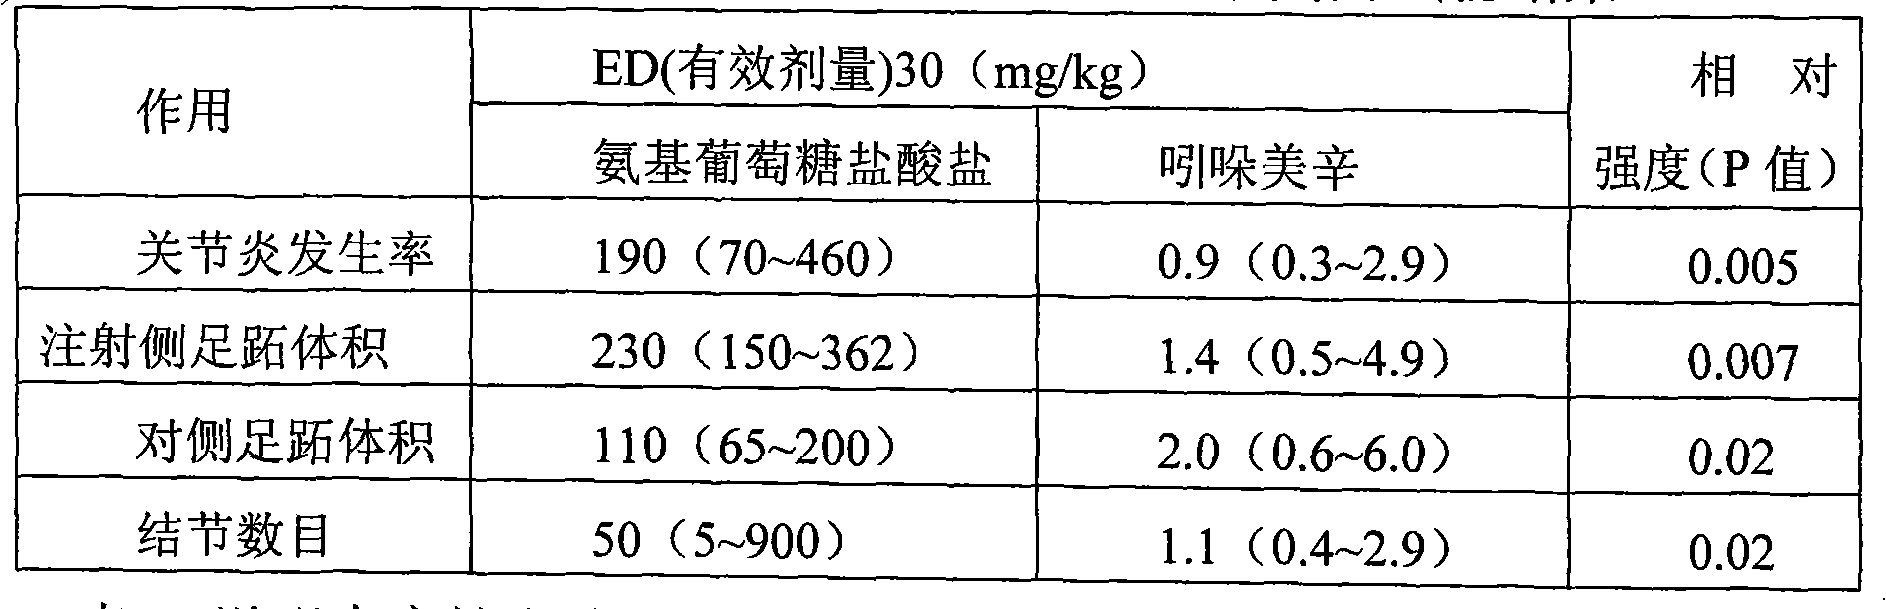 Compound for preventing osteoporosis and osteoarthrosis